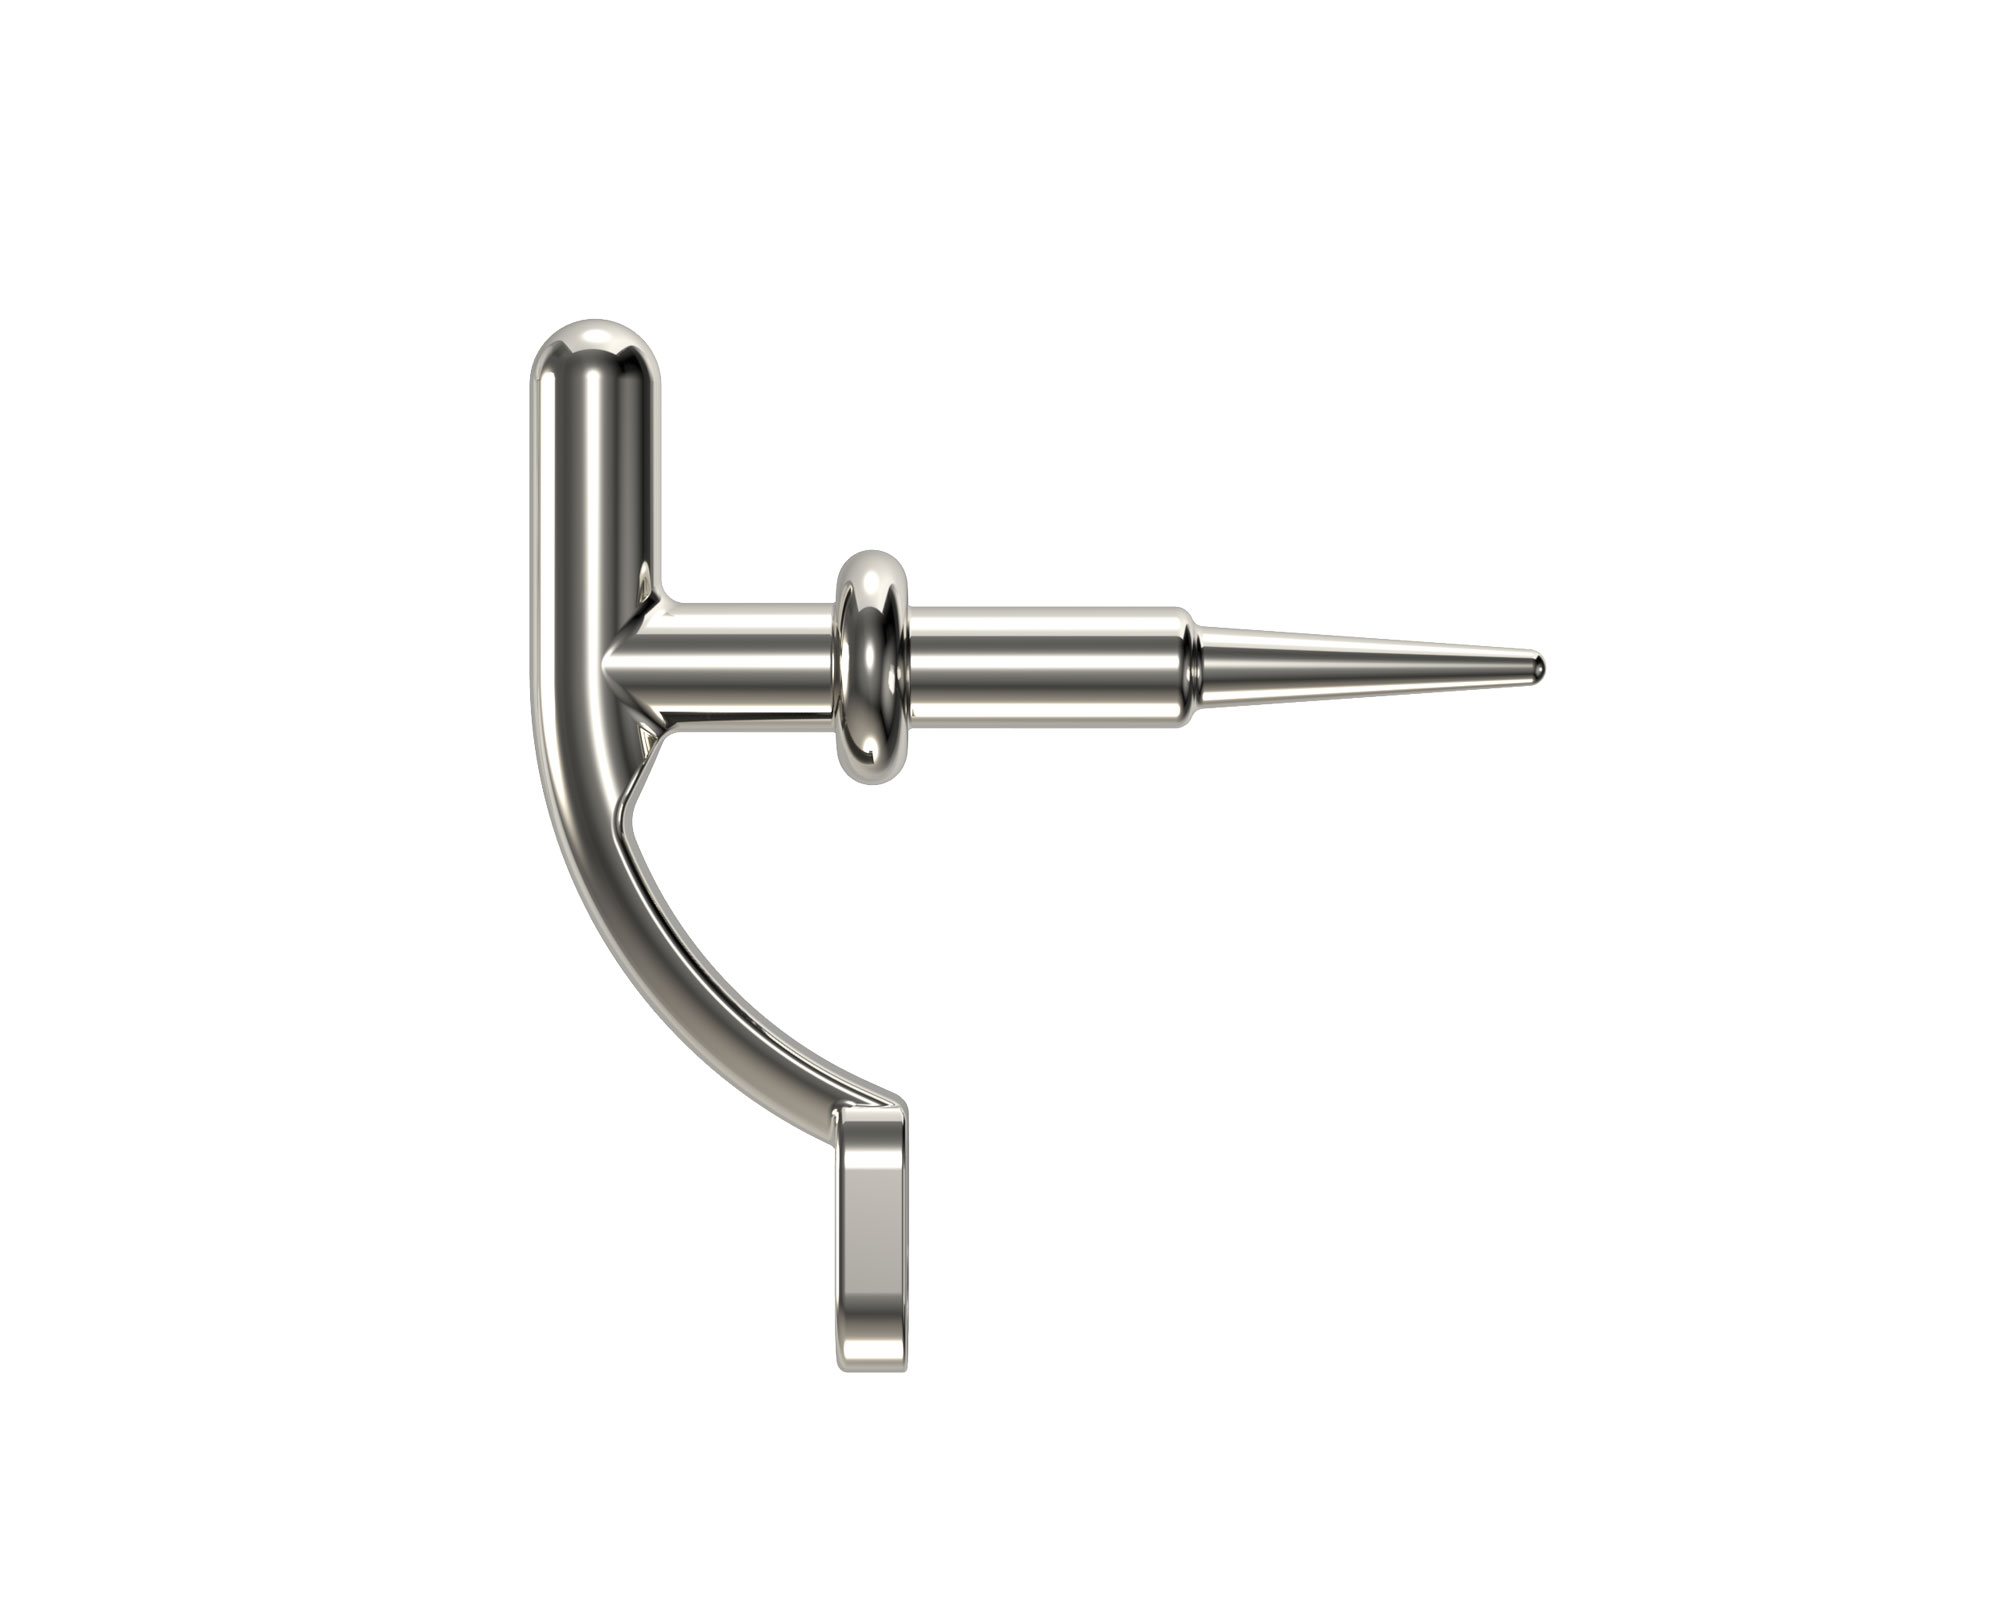 Staple for storm hook - classic window fittings - ROCA Industry